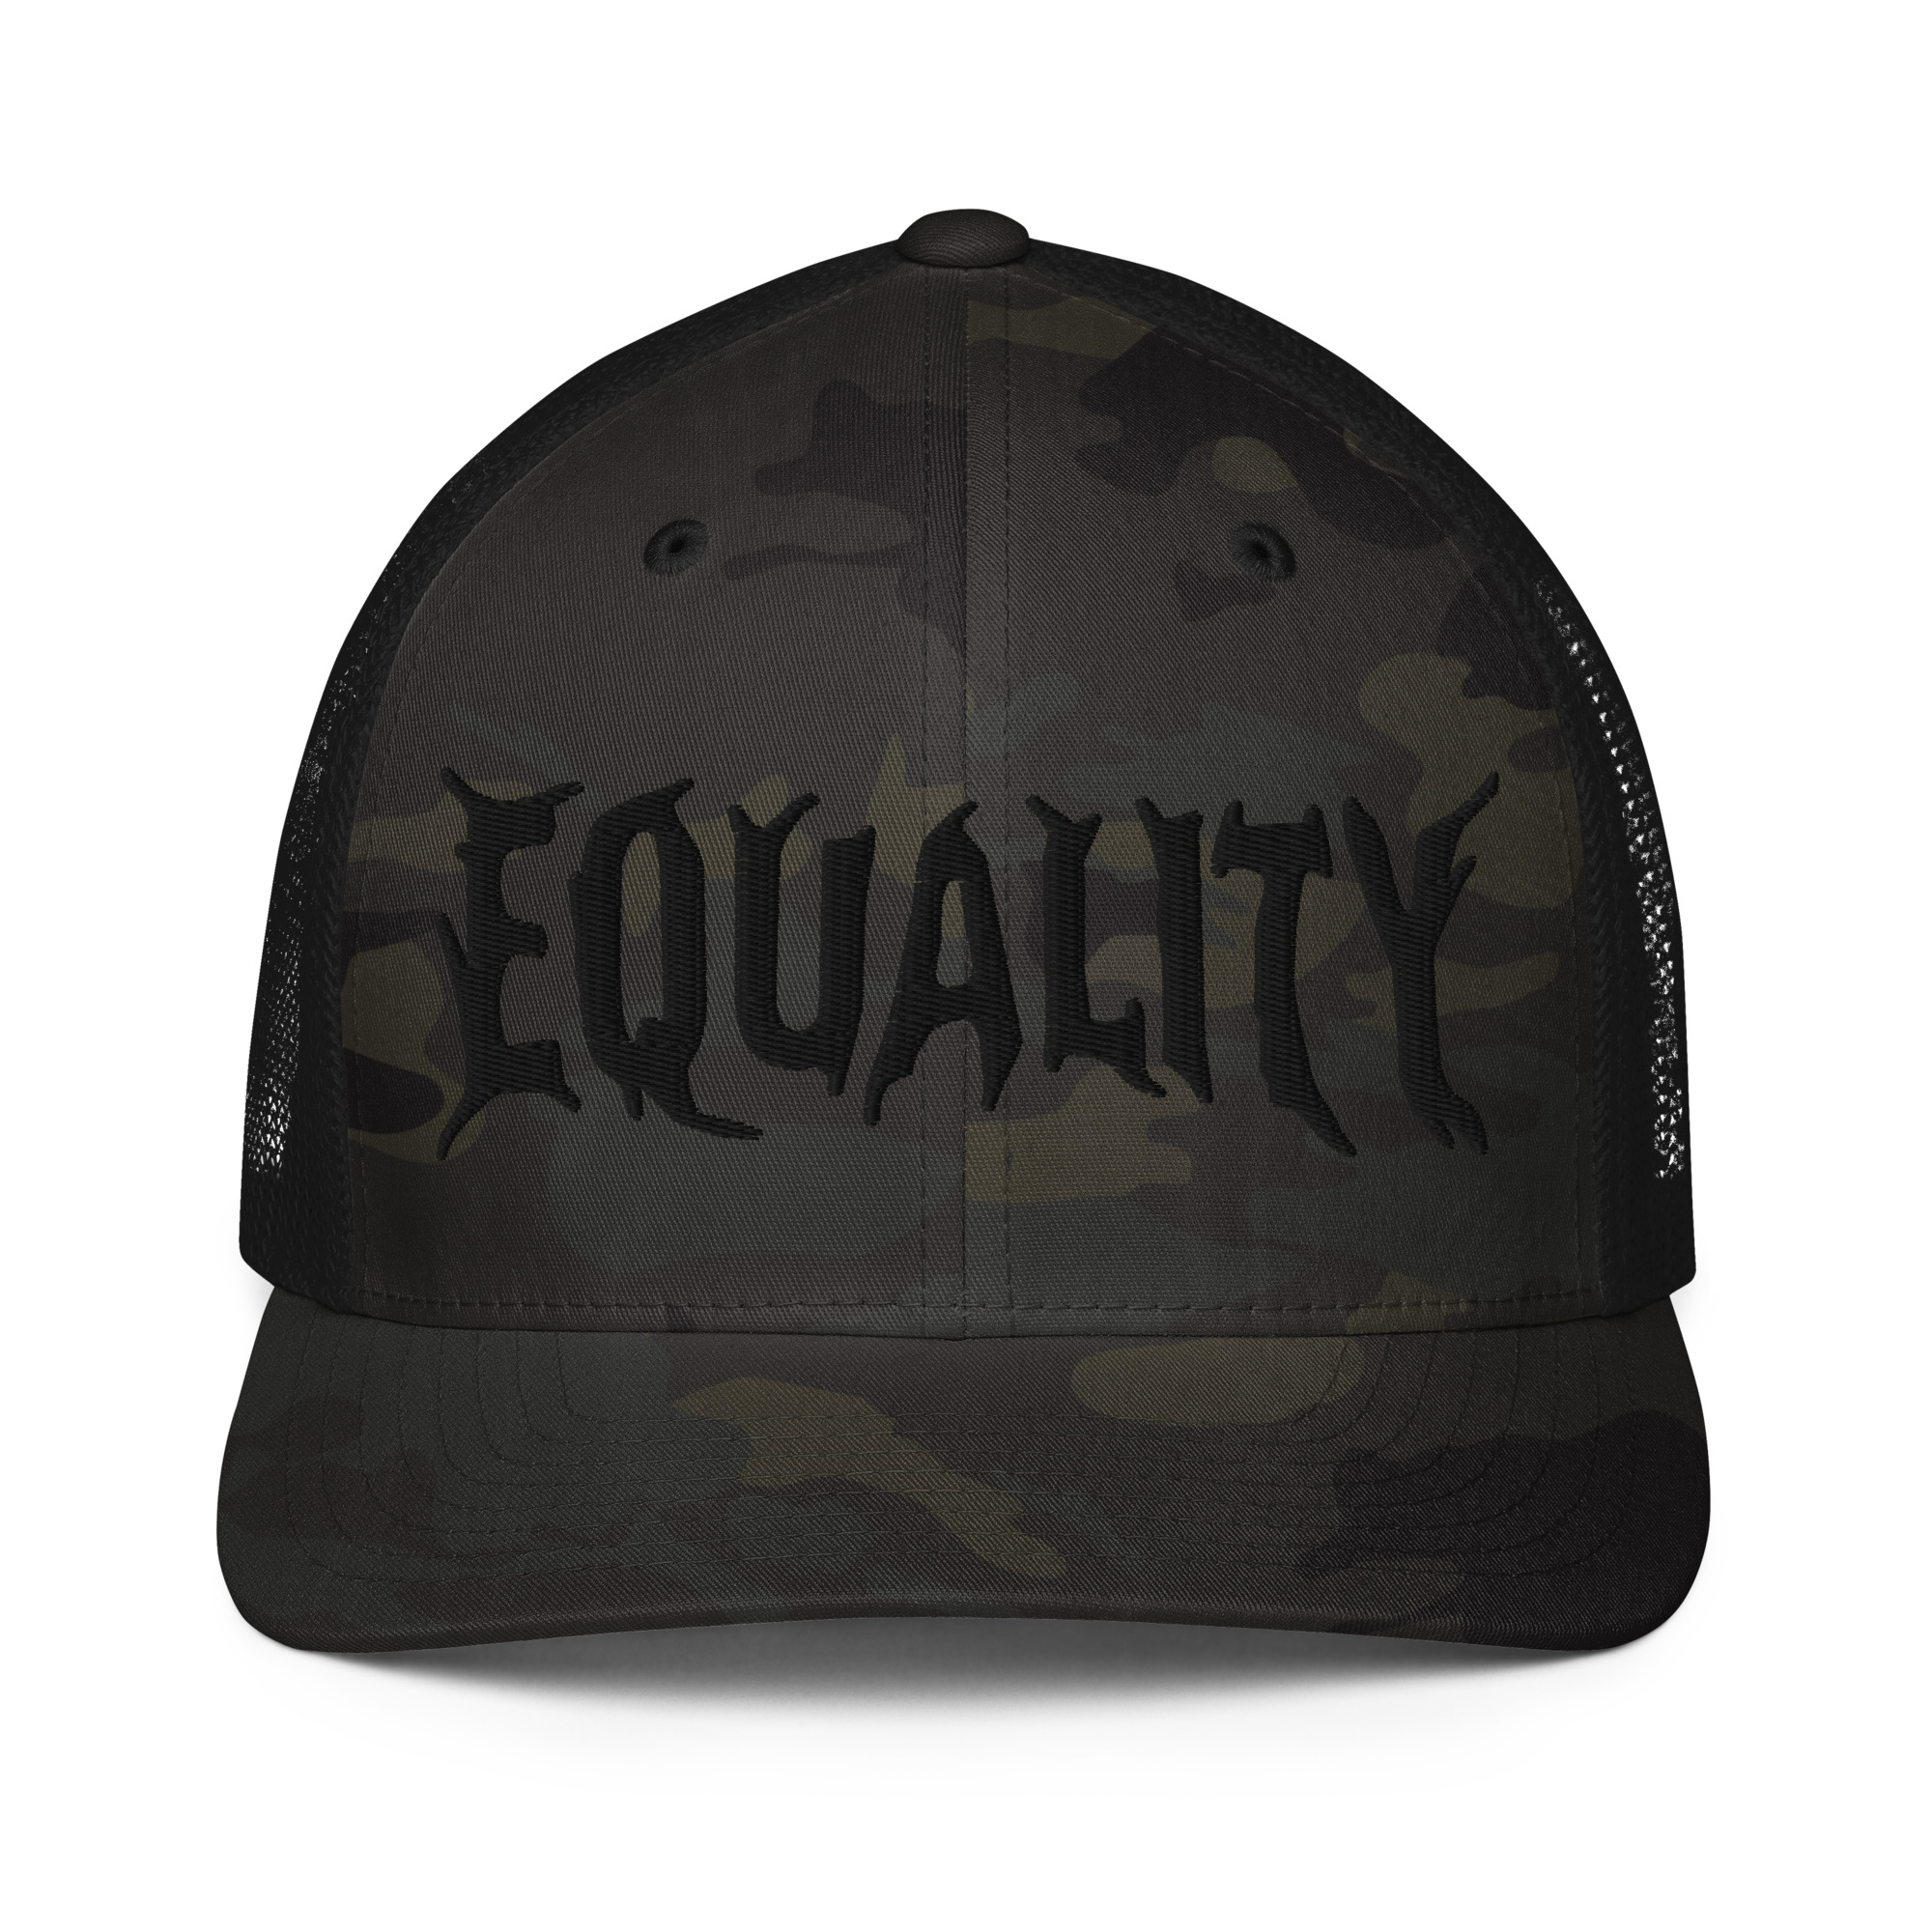 Featured image for “Equality - Flexfit Closed-back trucker cap”